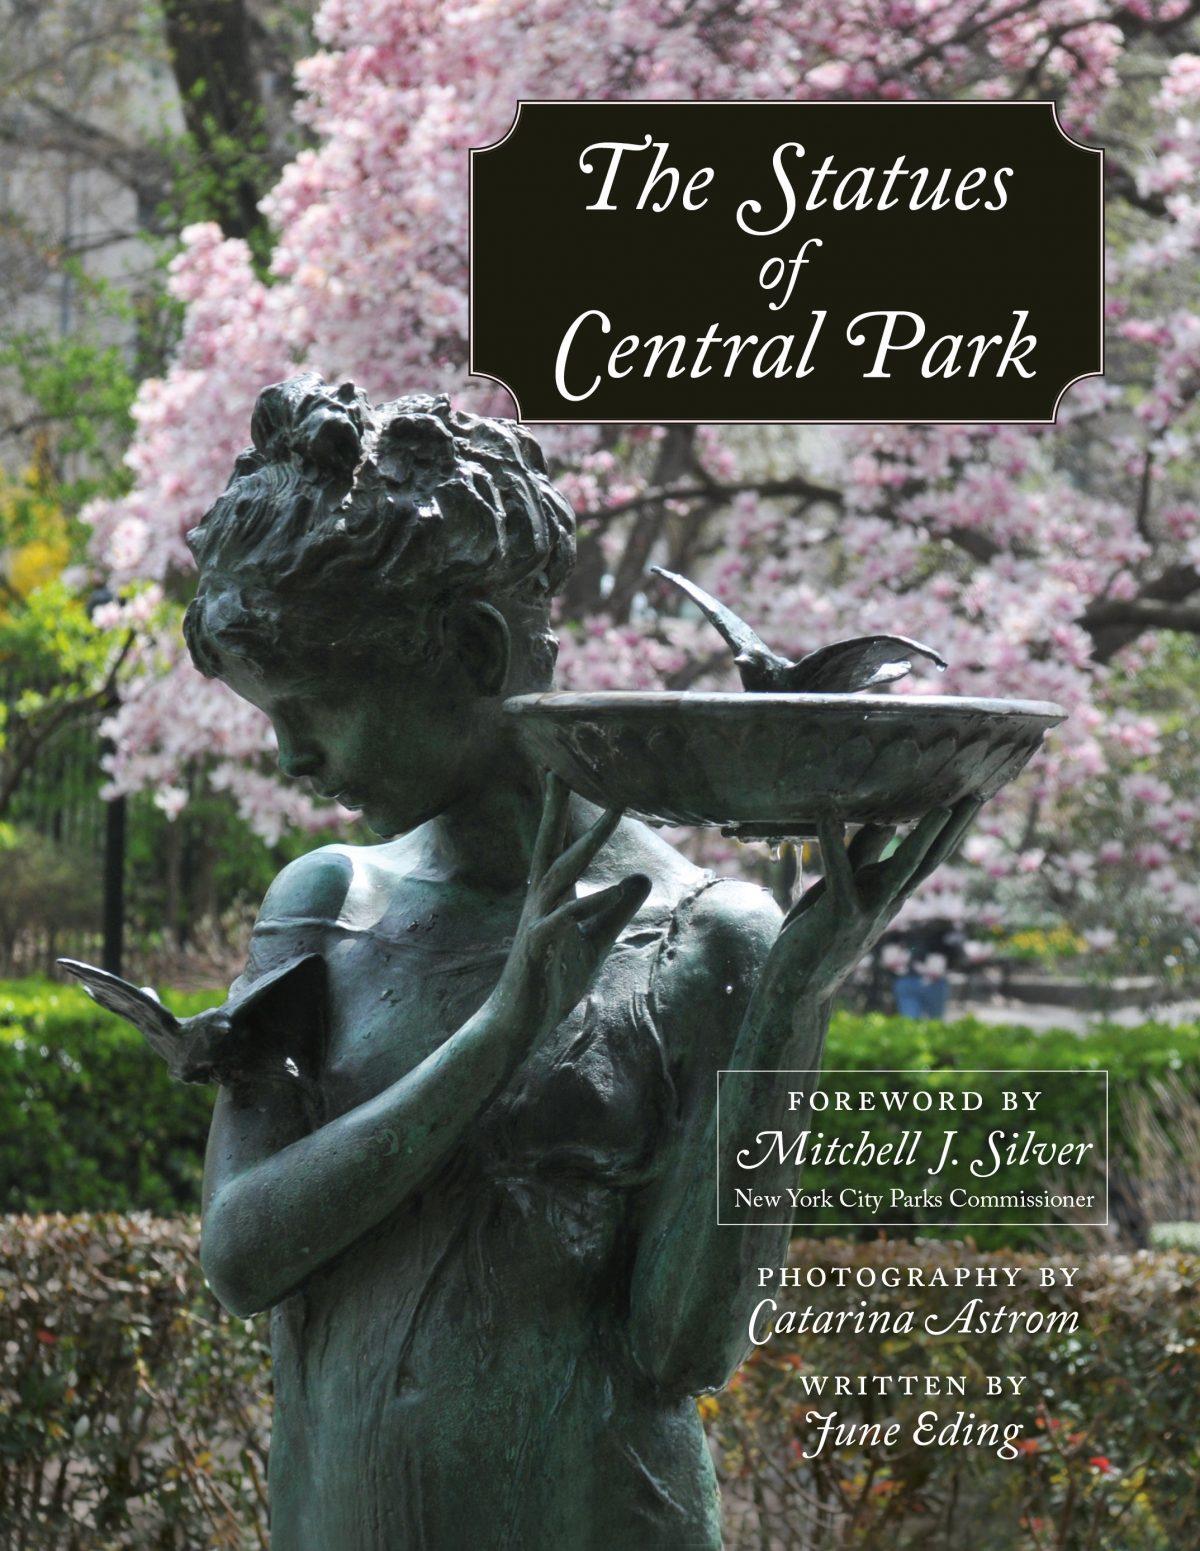 The cover of a coffee table book by June Eding, "The Statues in Central Park: <span style="color: #000000;">A Tribute to New York City's Most Famous Park and Its Monuments.”</span>